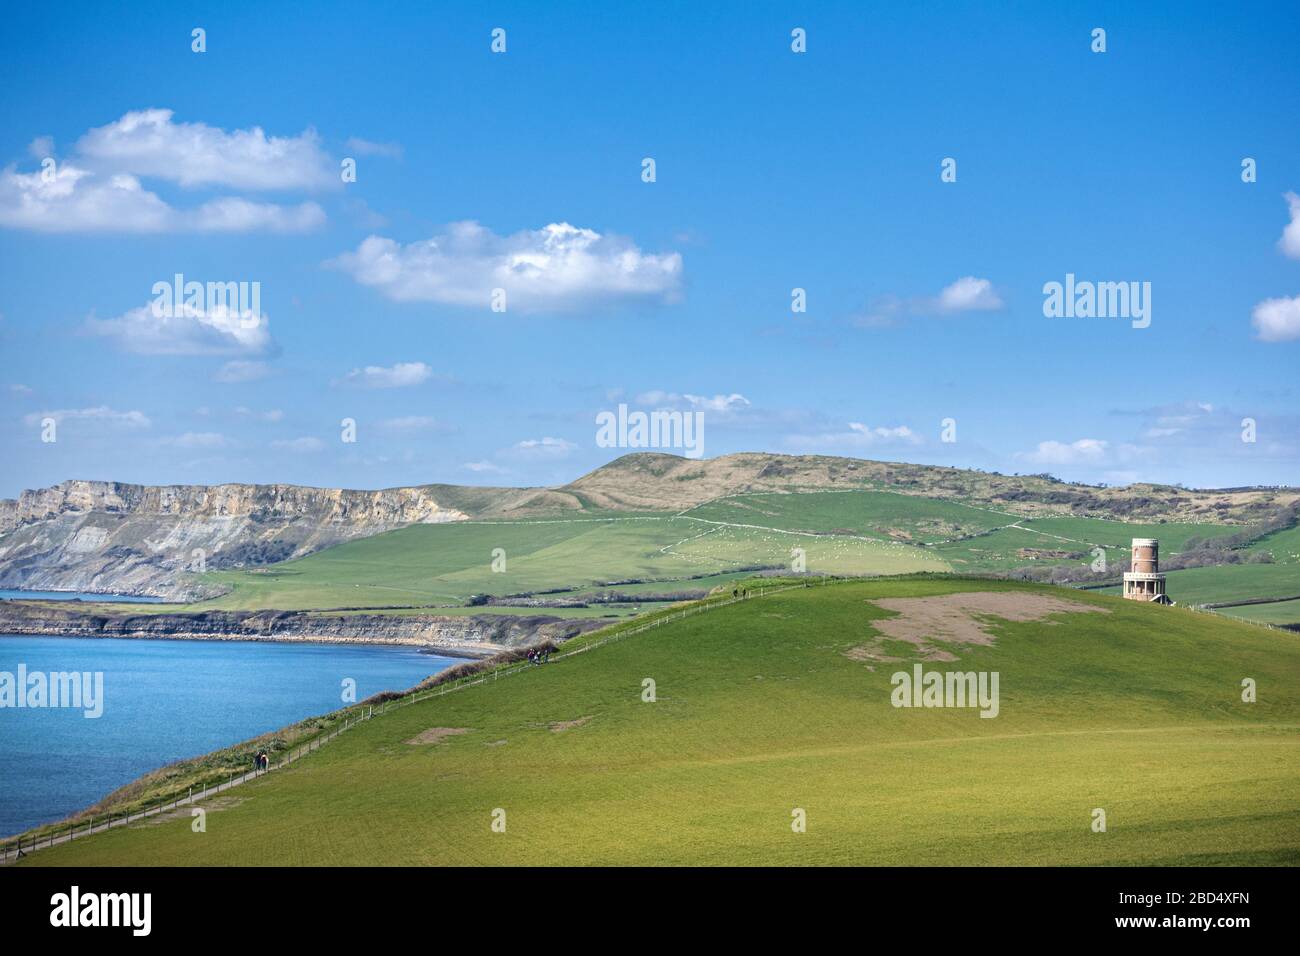 View down the Jurassic coastline in Dorset towards Kimmeridge Bay, showing Clavell Tower and Hobarrow Bay in the distance Stock Photo